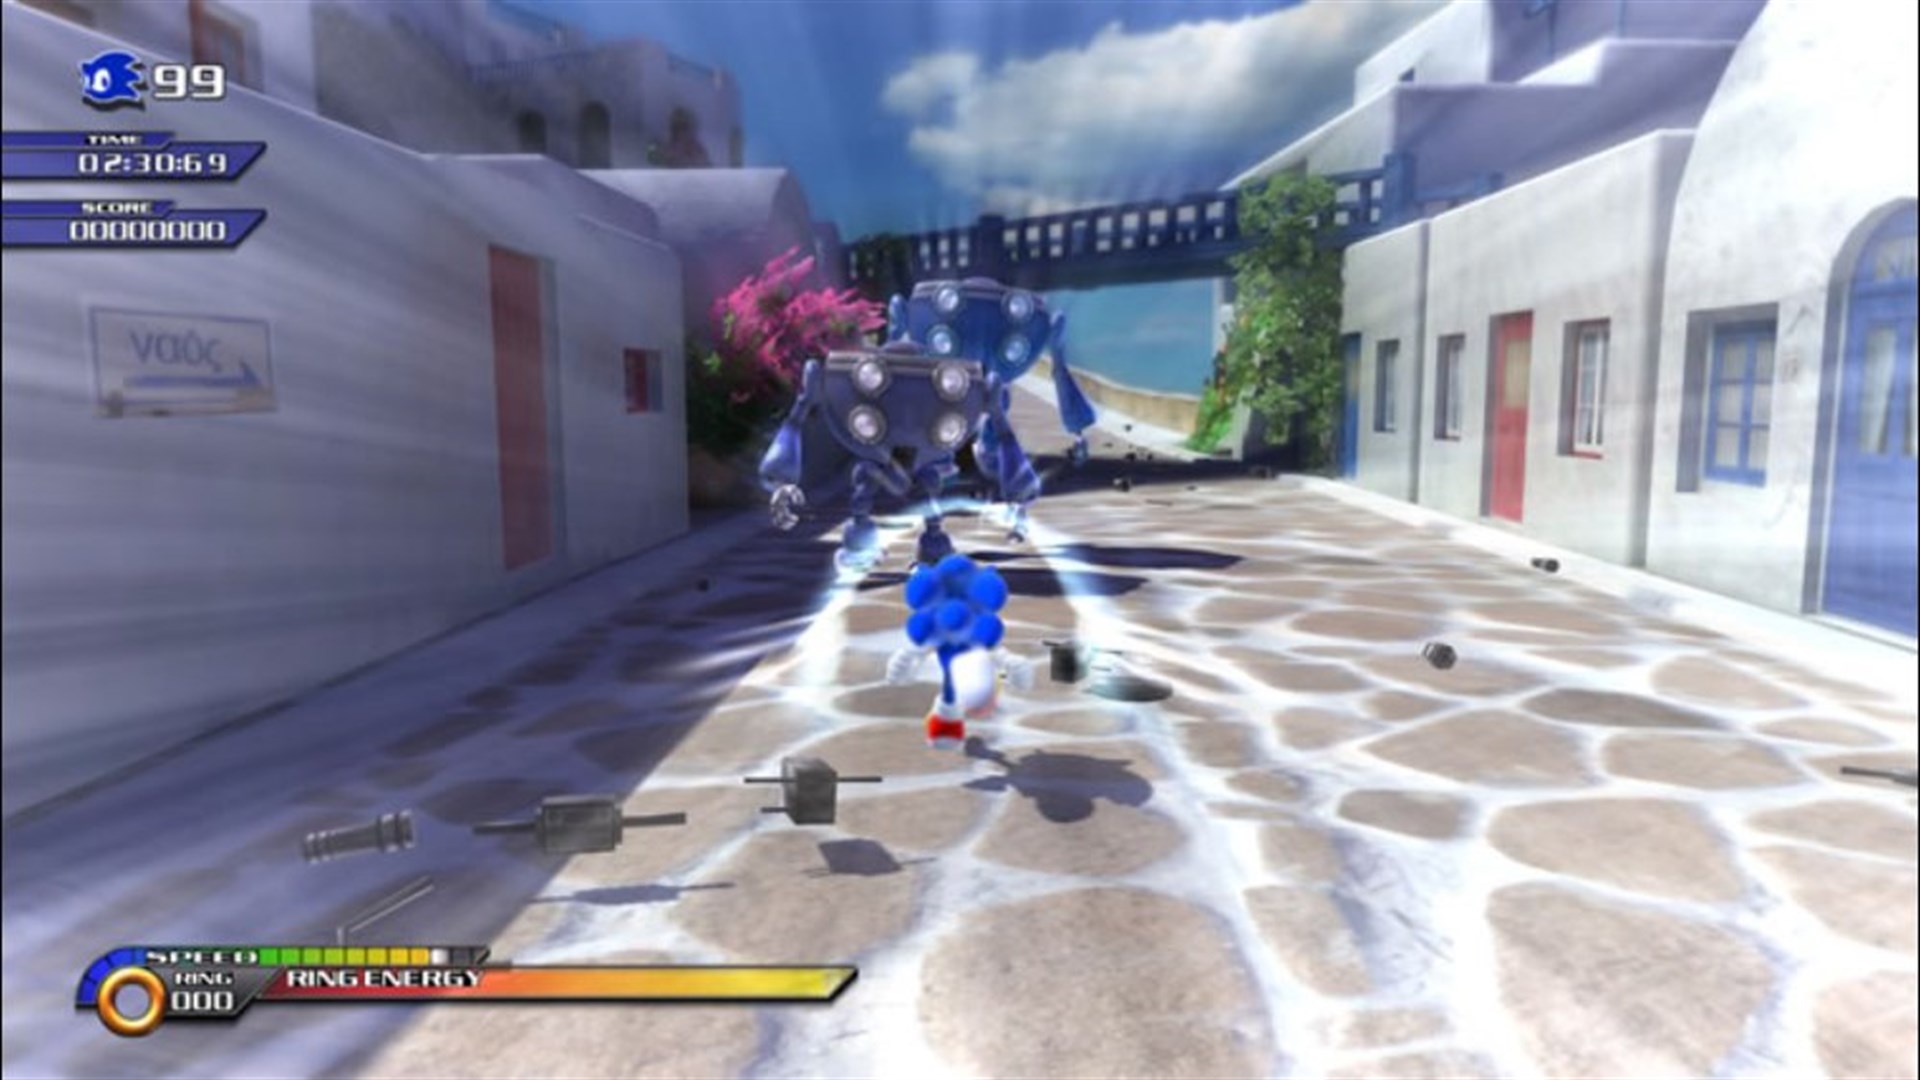 sonic unleashed xbox one digital download